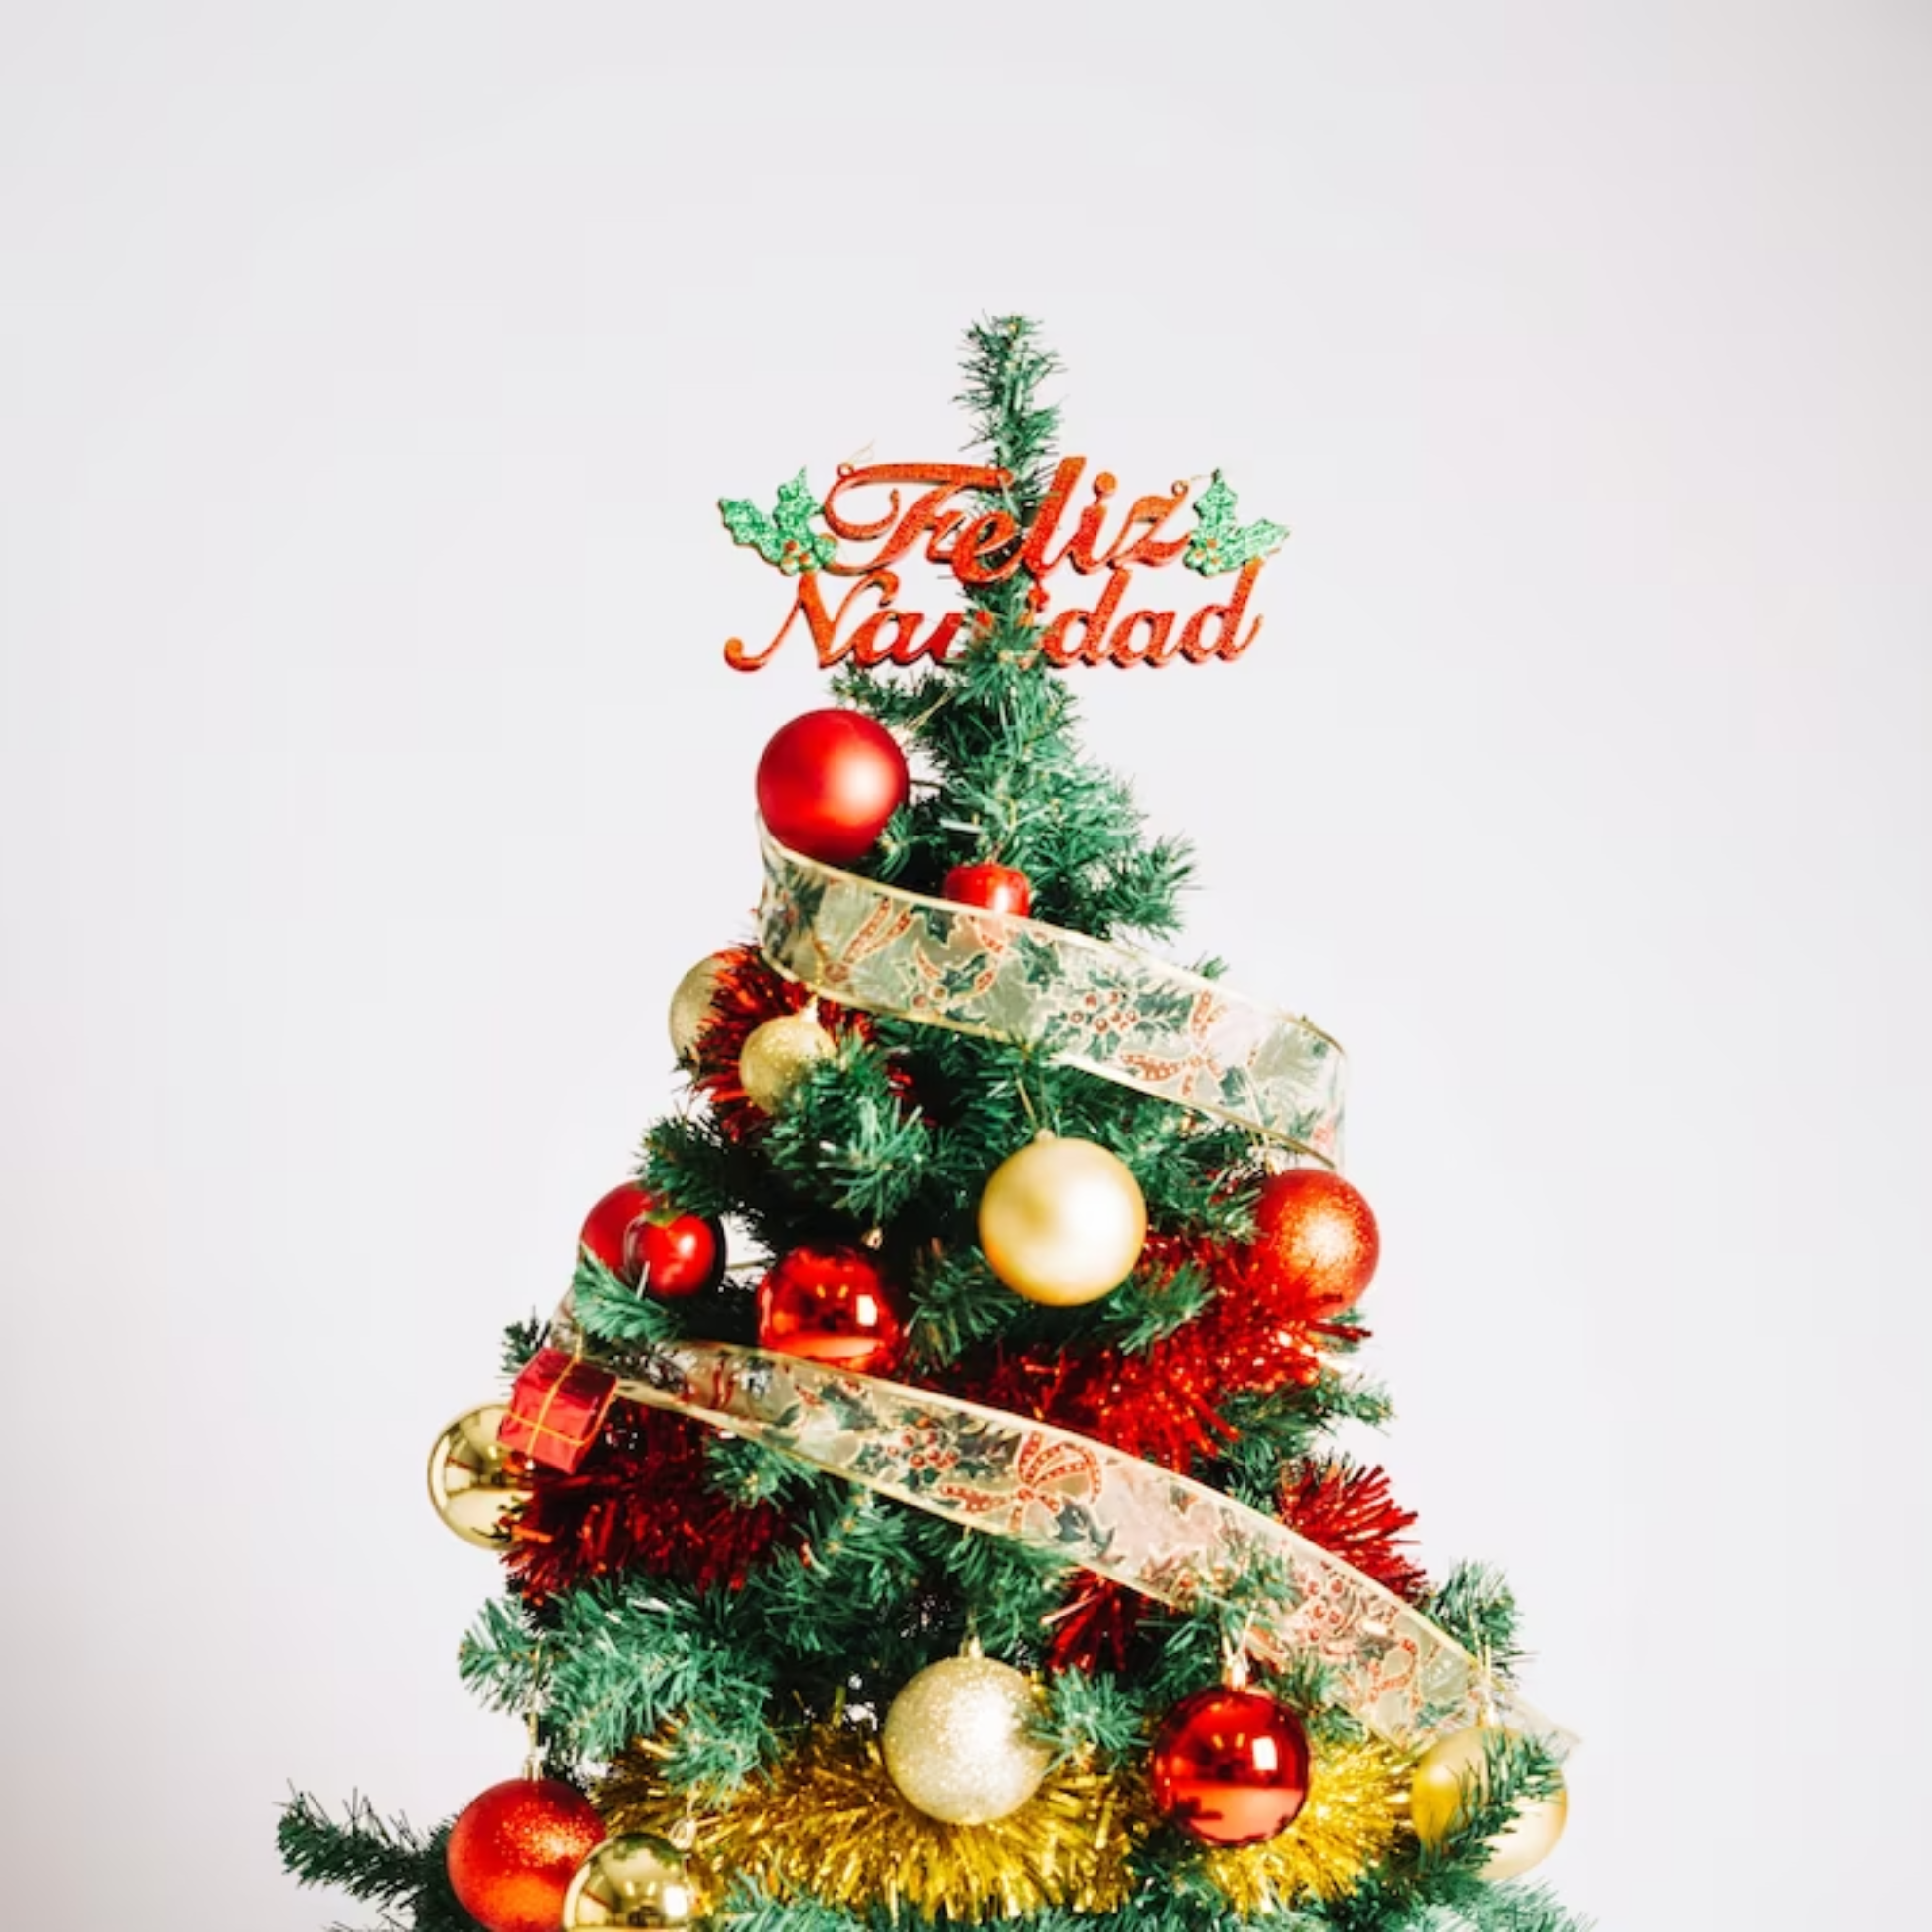 How to Decorate a Christmas Tree with Ribbon Vertically